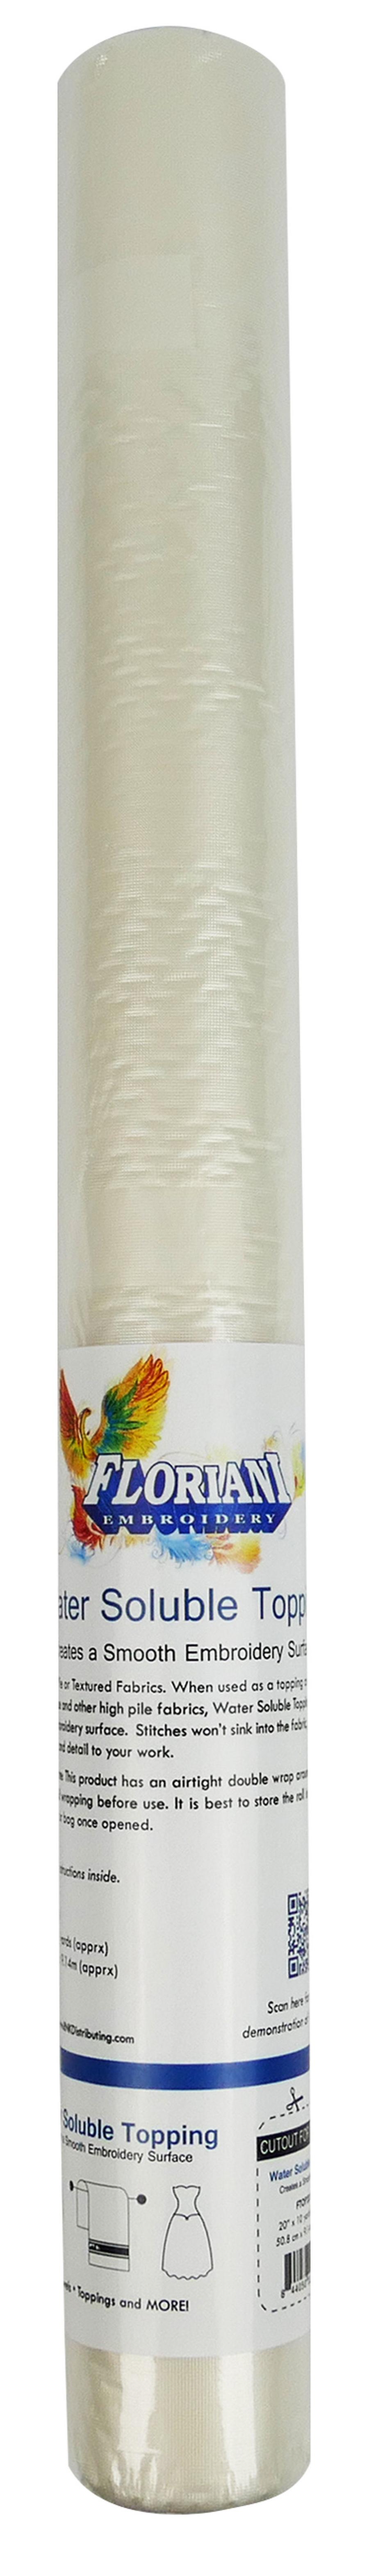 Floriani Water Soluble Topping, 20in. x 10 yds